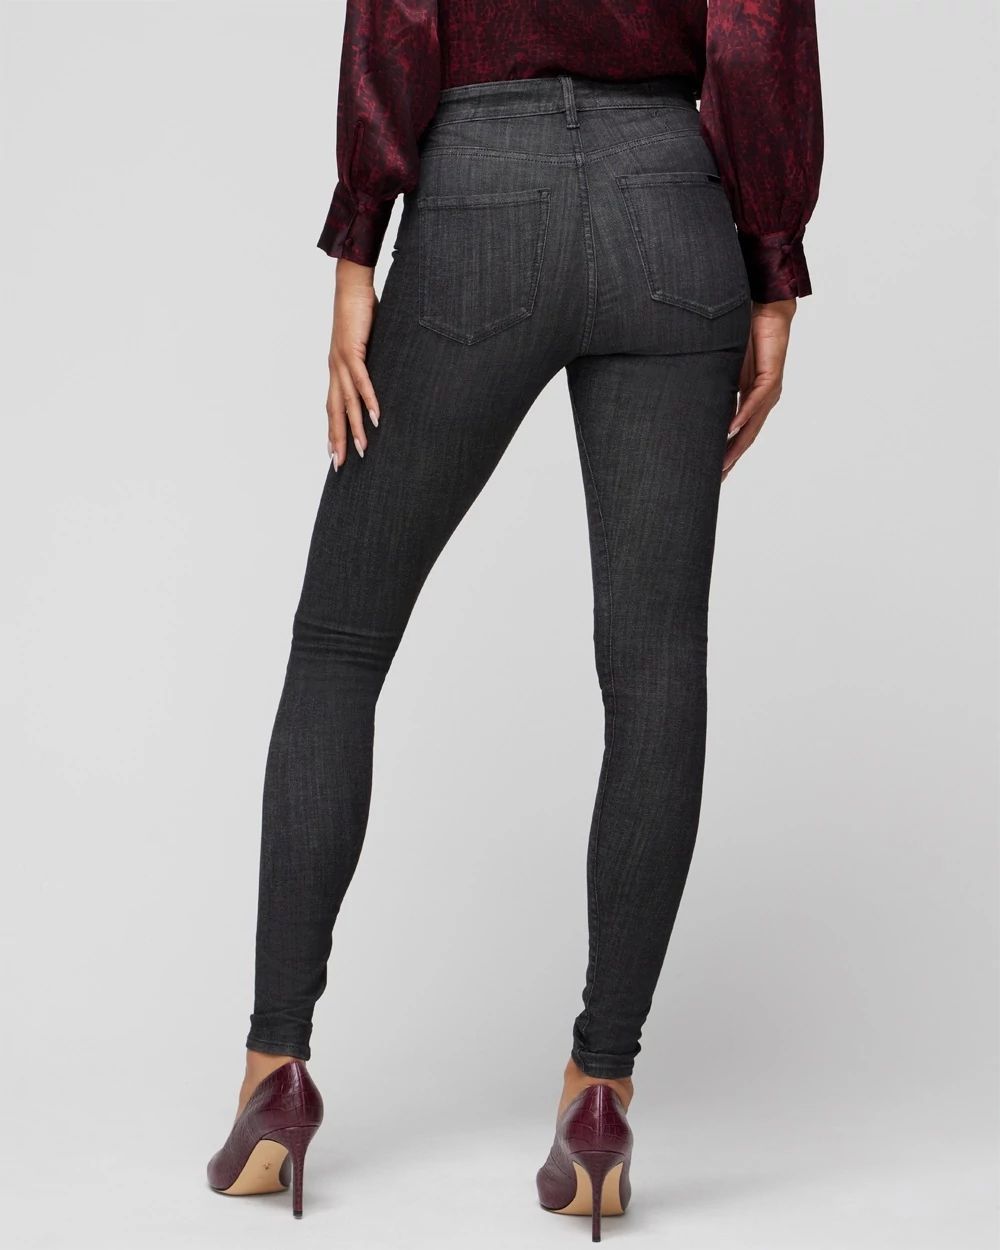 High Rise Jeanie Denim Legging click to view larger image.